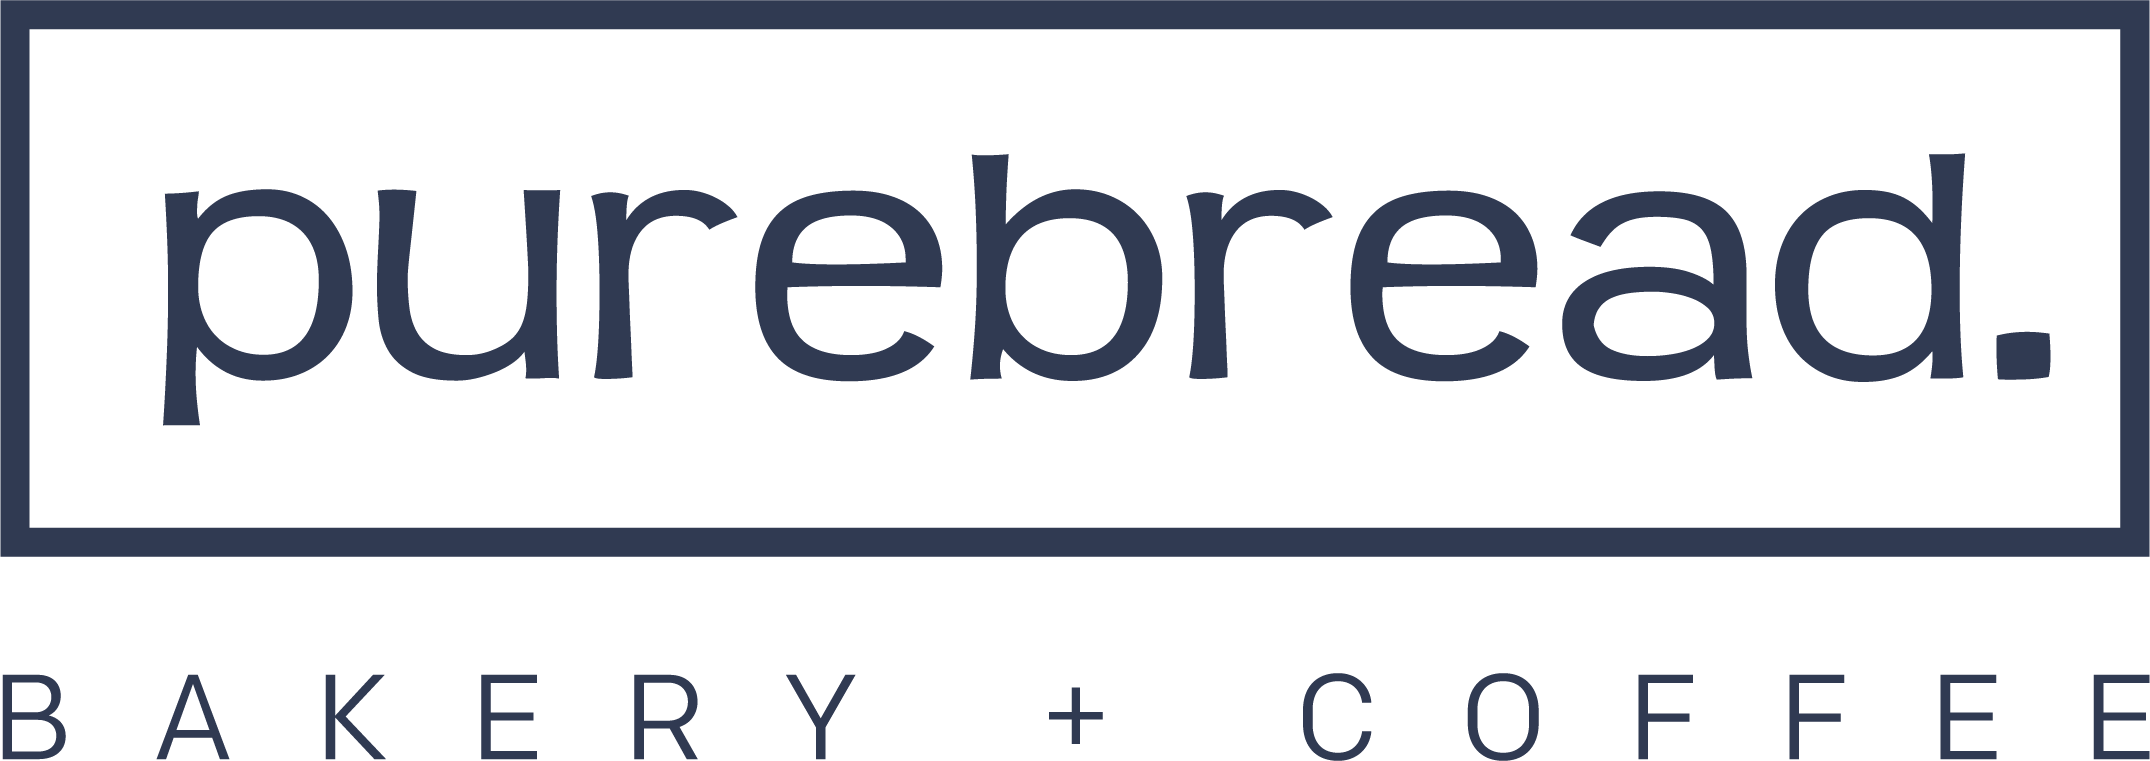 The logo for Purebread Bakery consists of the word 'purebread' in a bold, modern sans-serif typeface in a dark navy colour. The name is presented in lowercase letters with a period at the end. Below the main brand name, the words 'bakery + coffee' are written in all caps, in a smaller, thinner font.